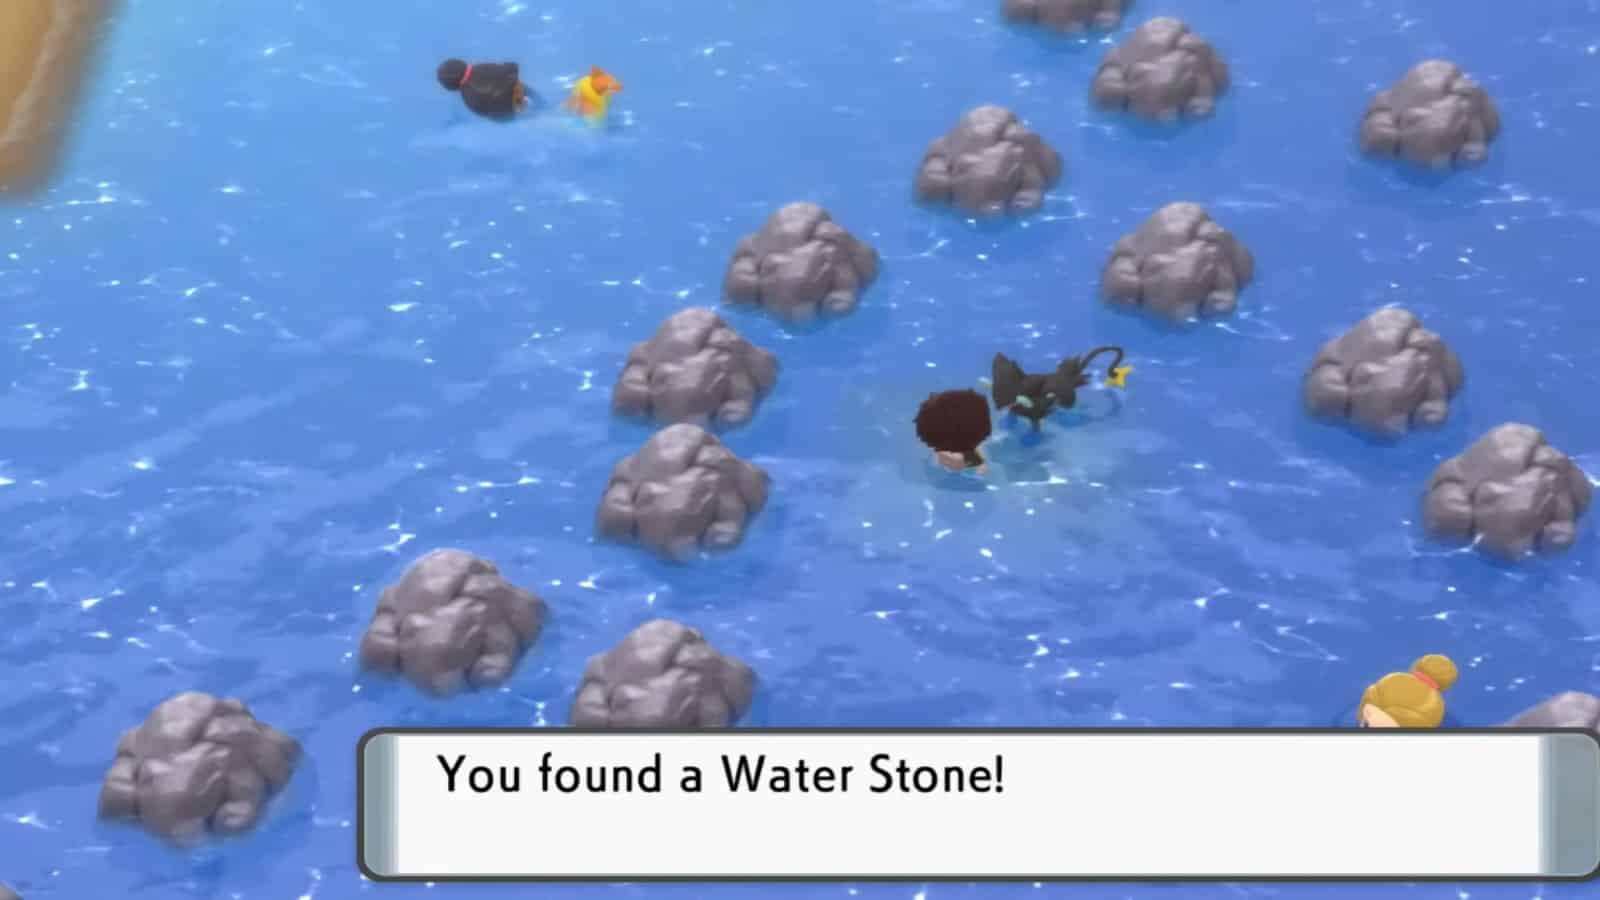 The Water Stone on Route 213 is hidden in the rocky guardrails along the waterline